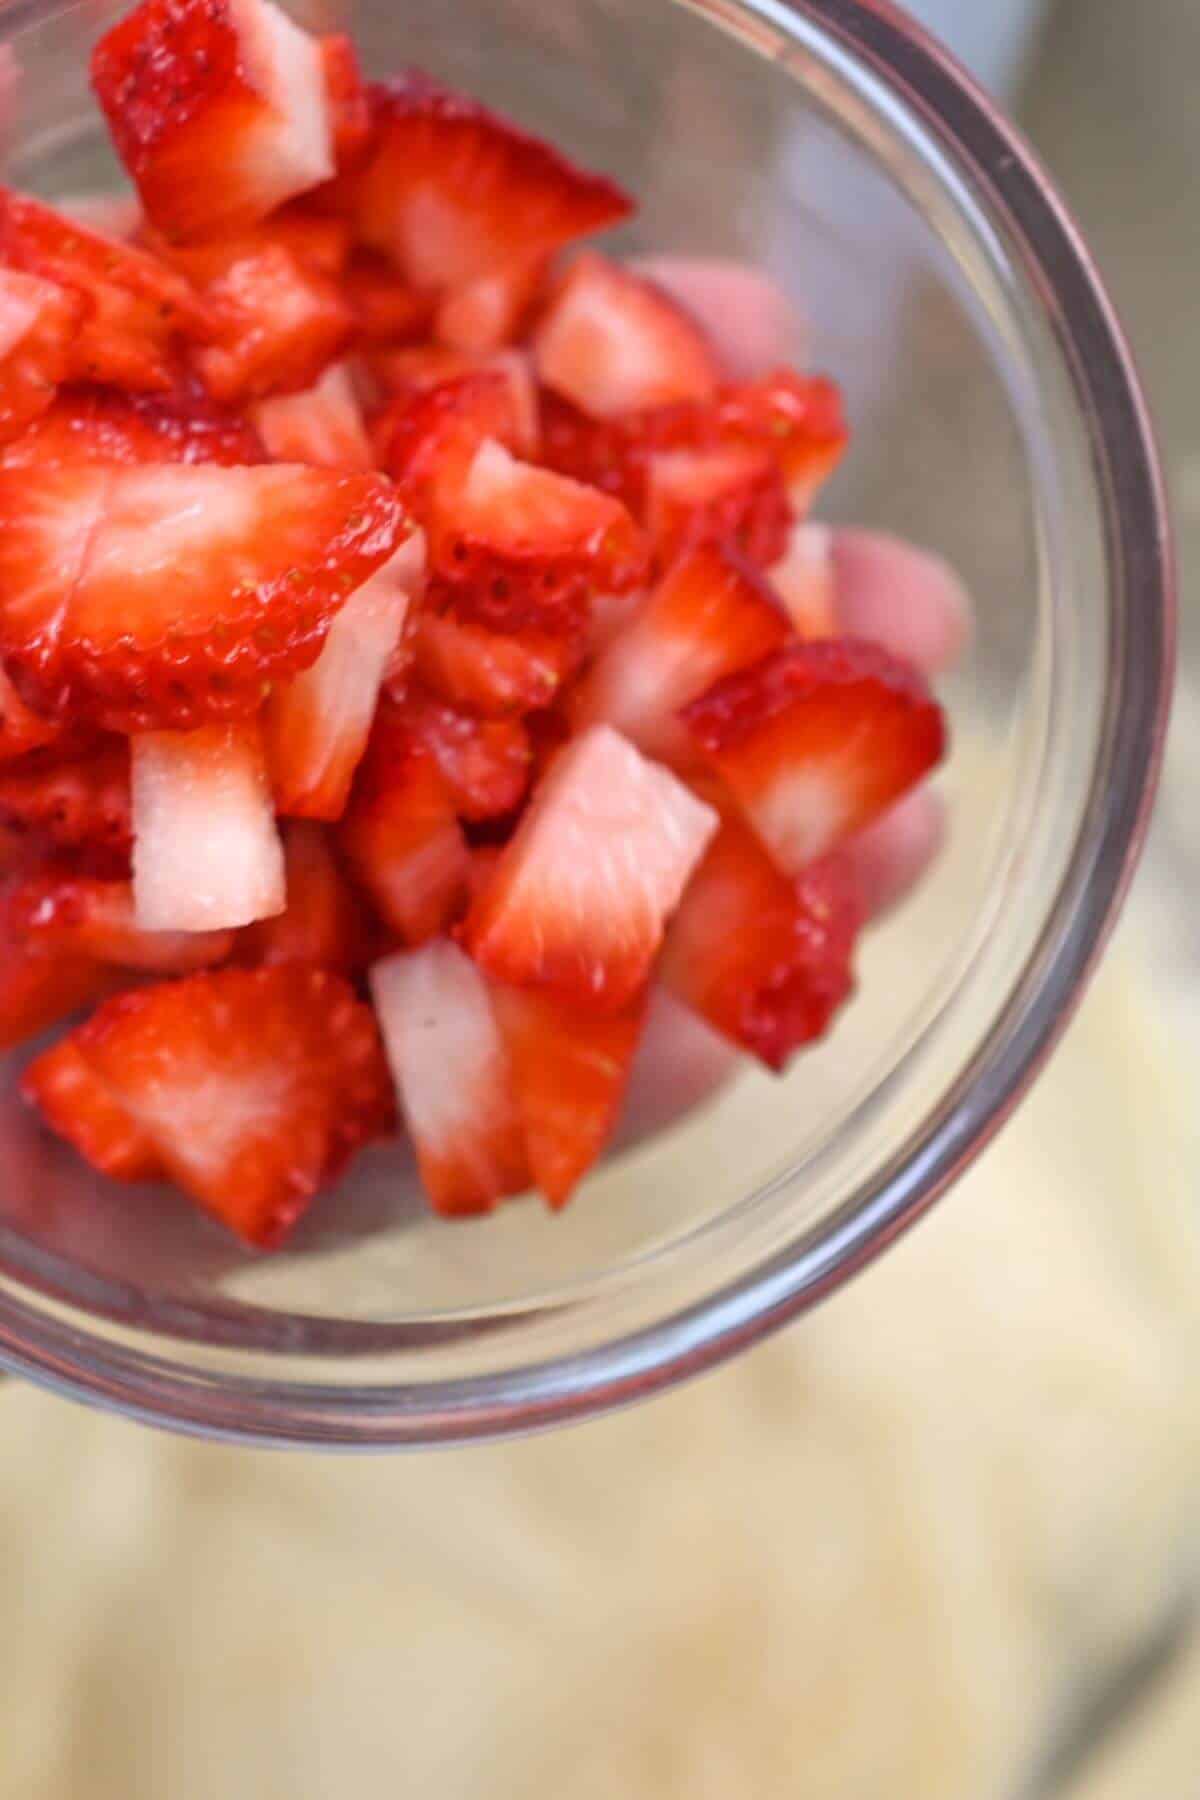 Pouring diced strawberries into pound cake batter.